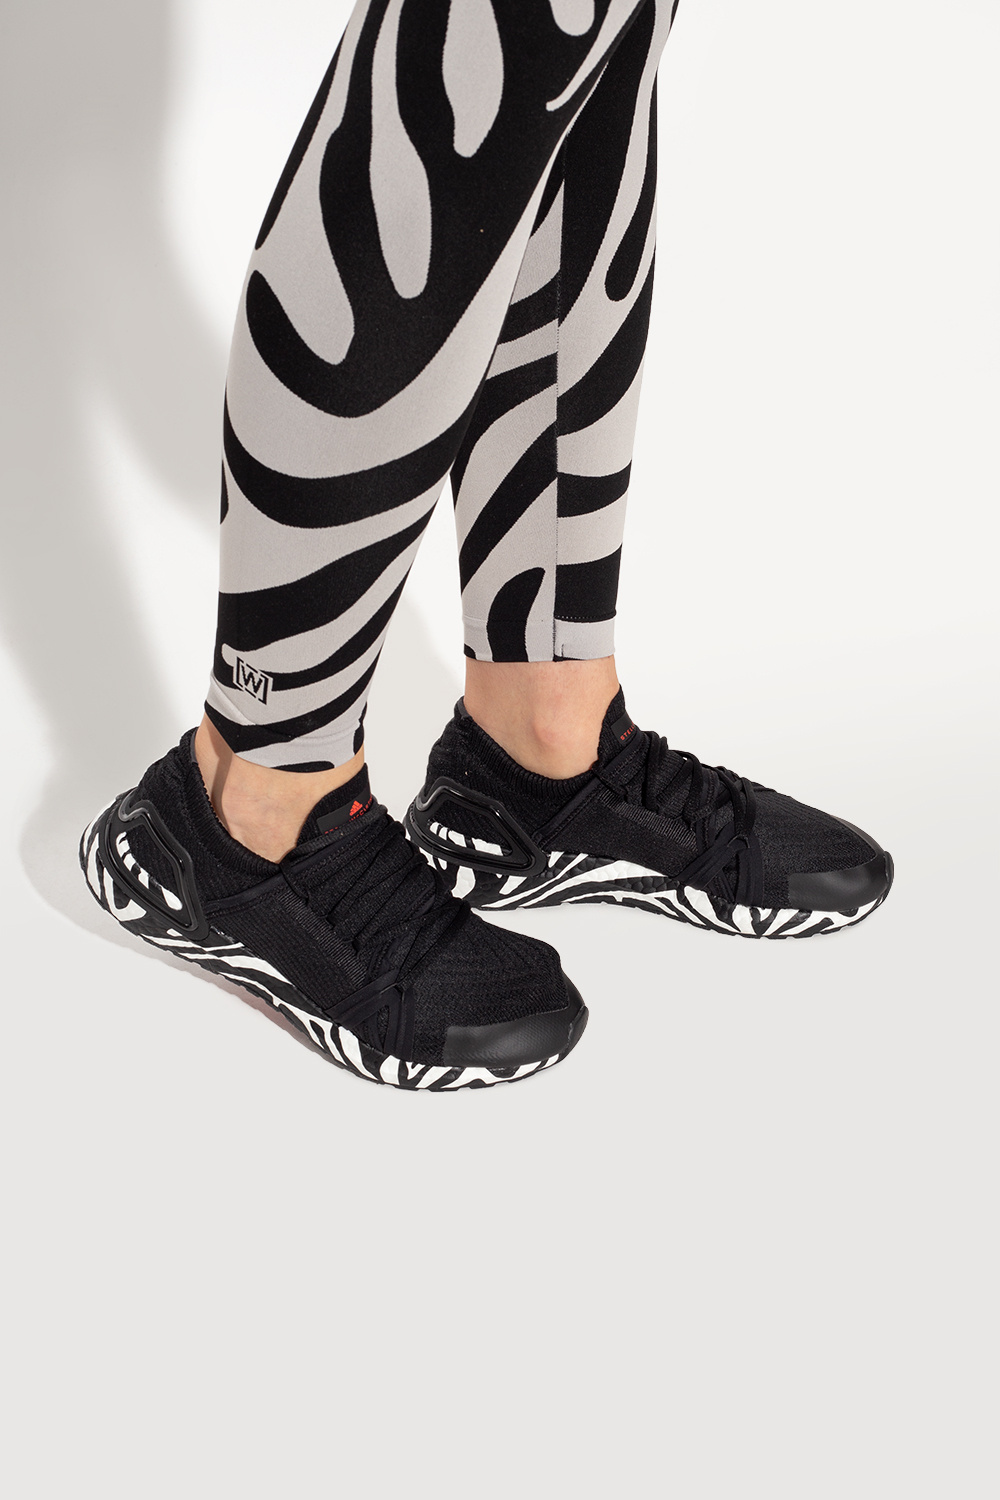 adidas polo by Stella McCartney ‘UltraBOOST 20 Graphic’ sneakers